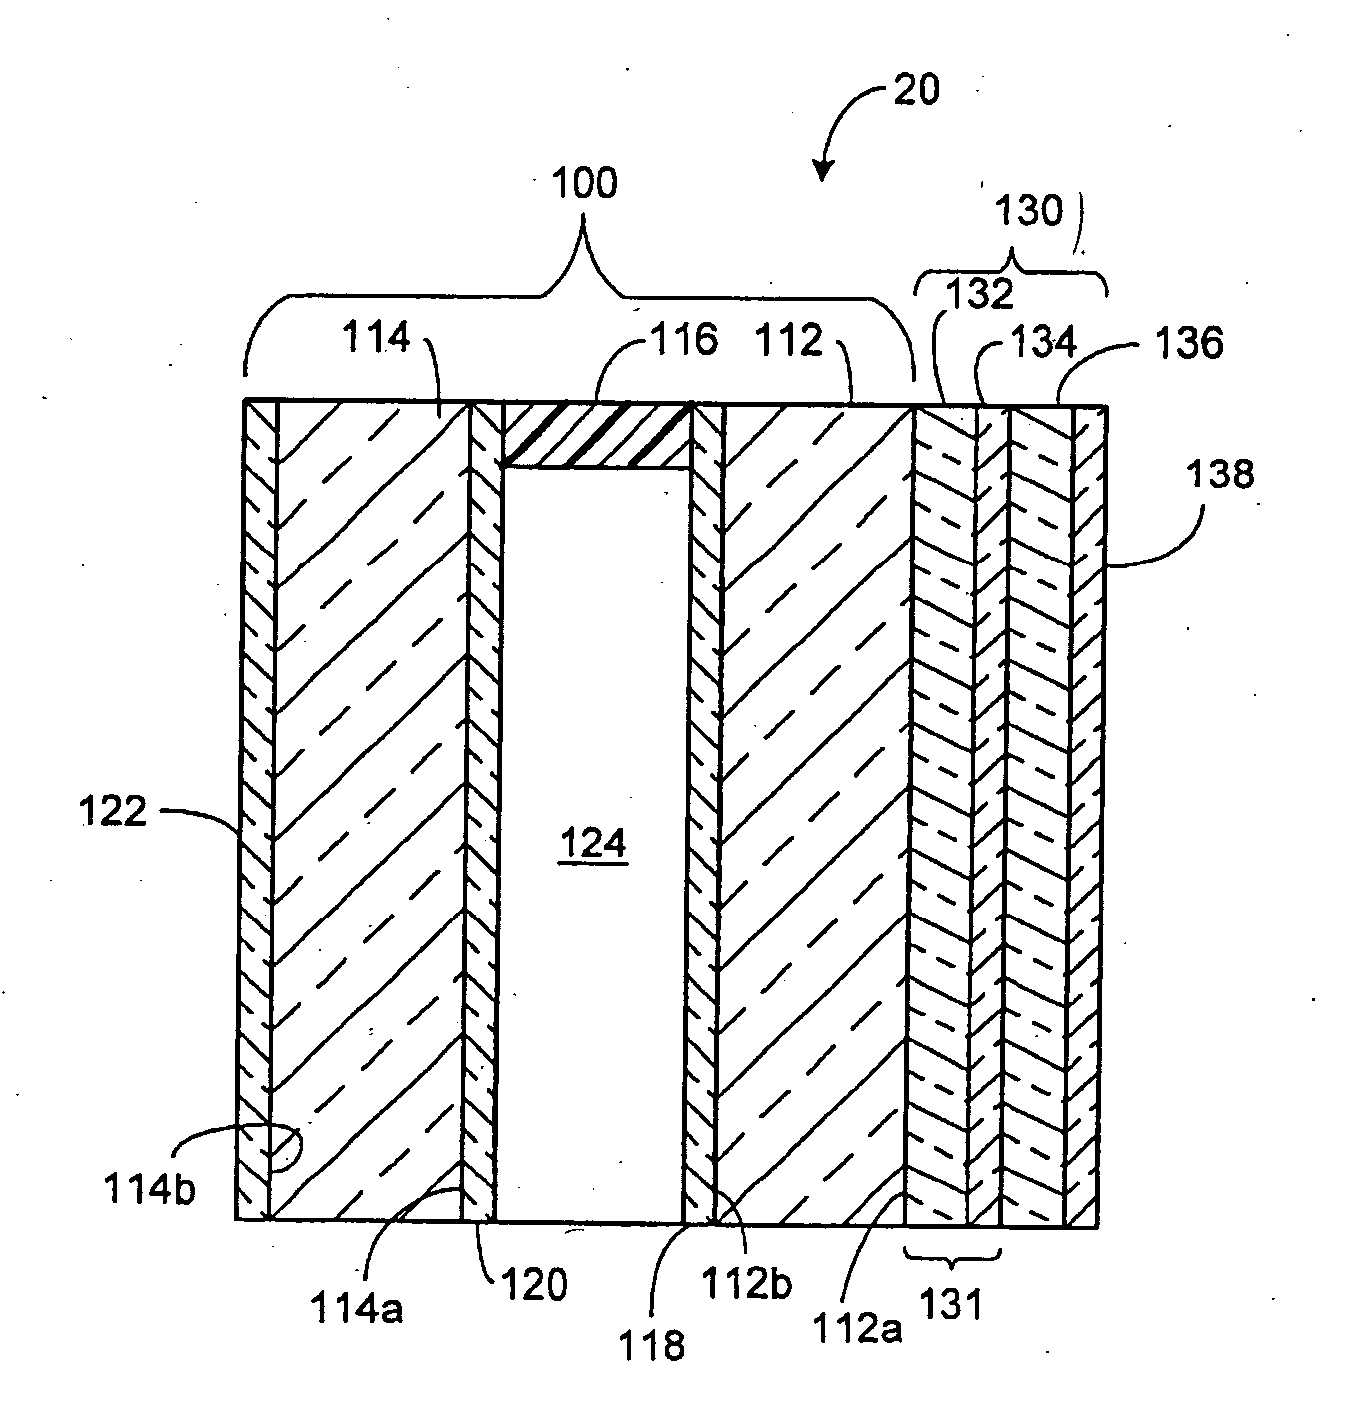 Electrochromic device having a self-cleaning hydrophilic coating with a controlled surface morphology